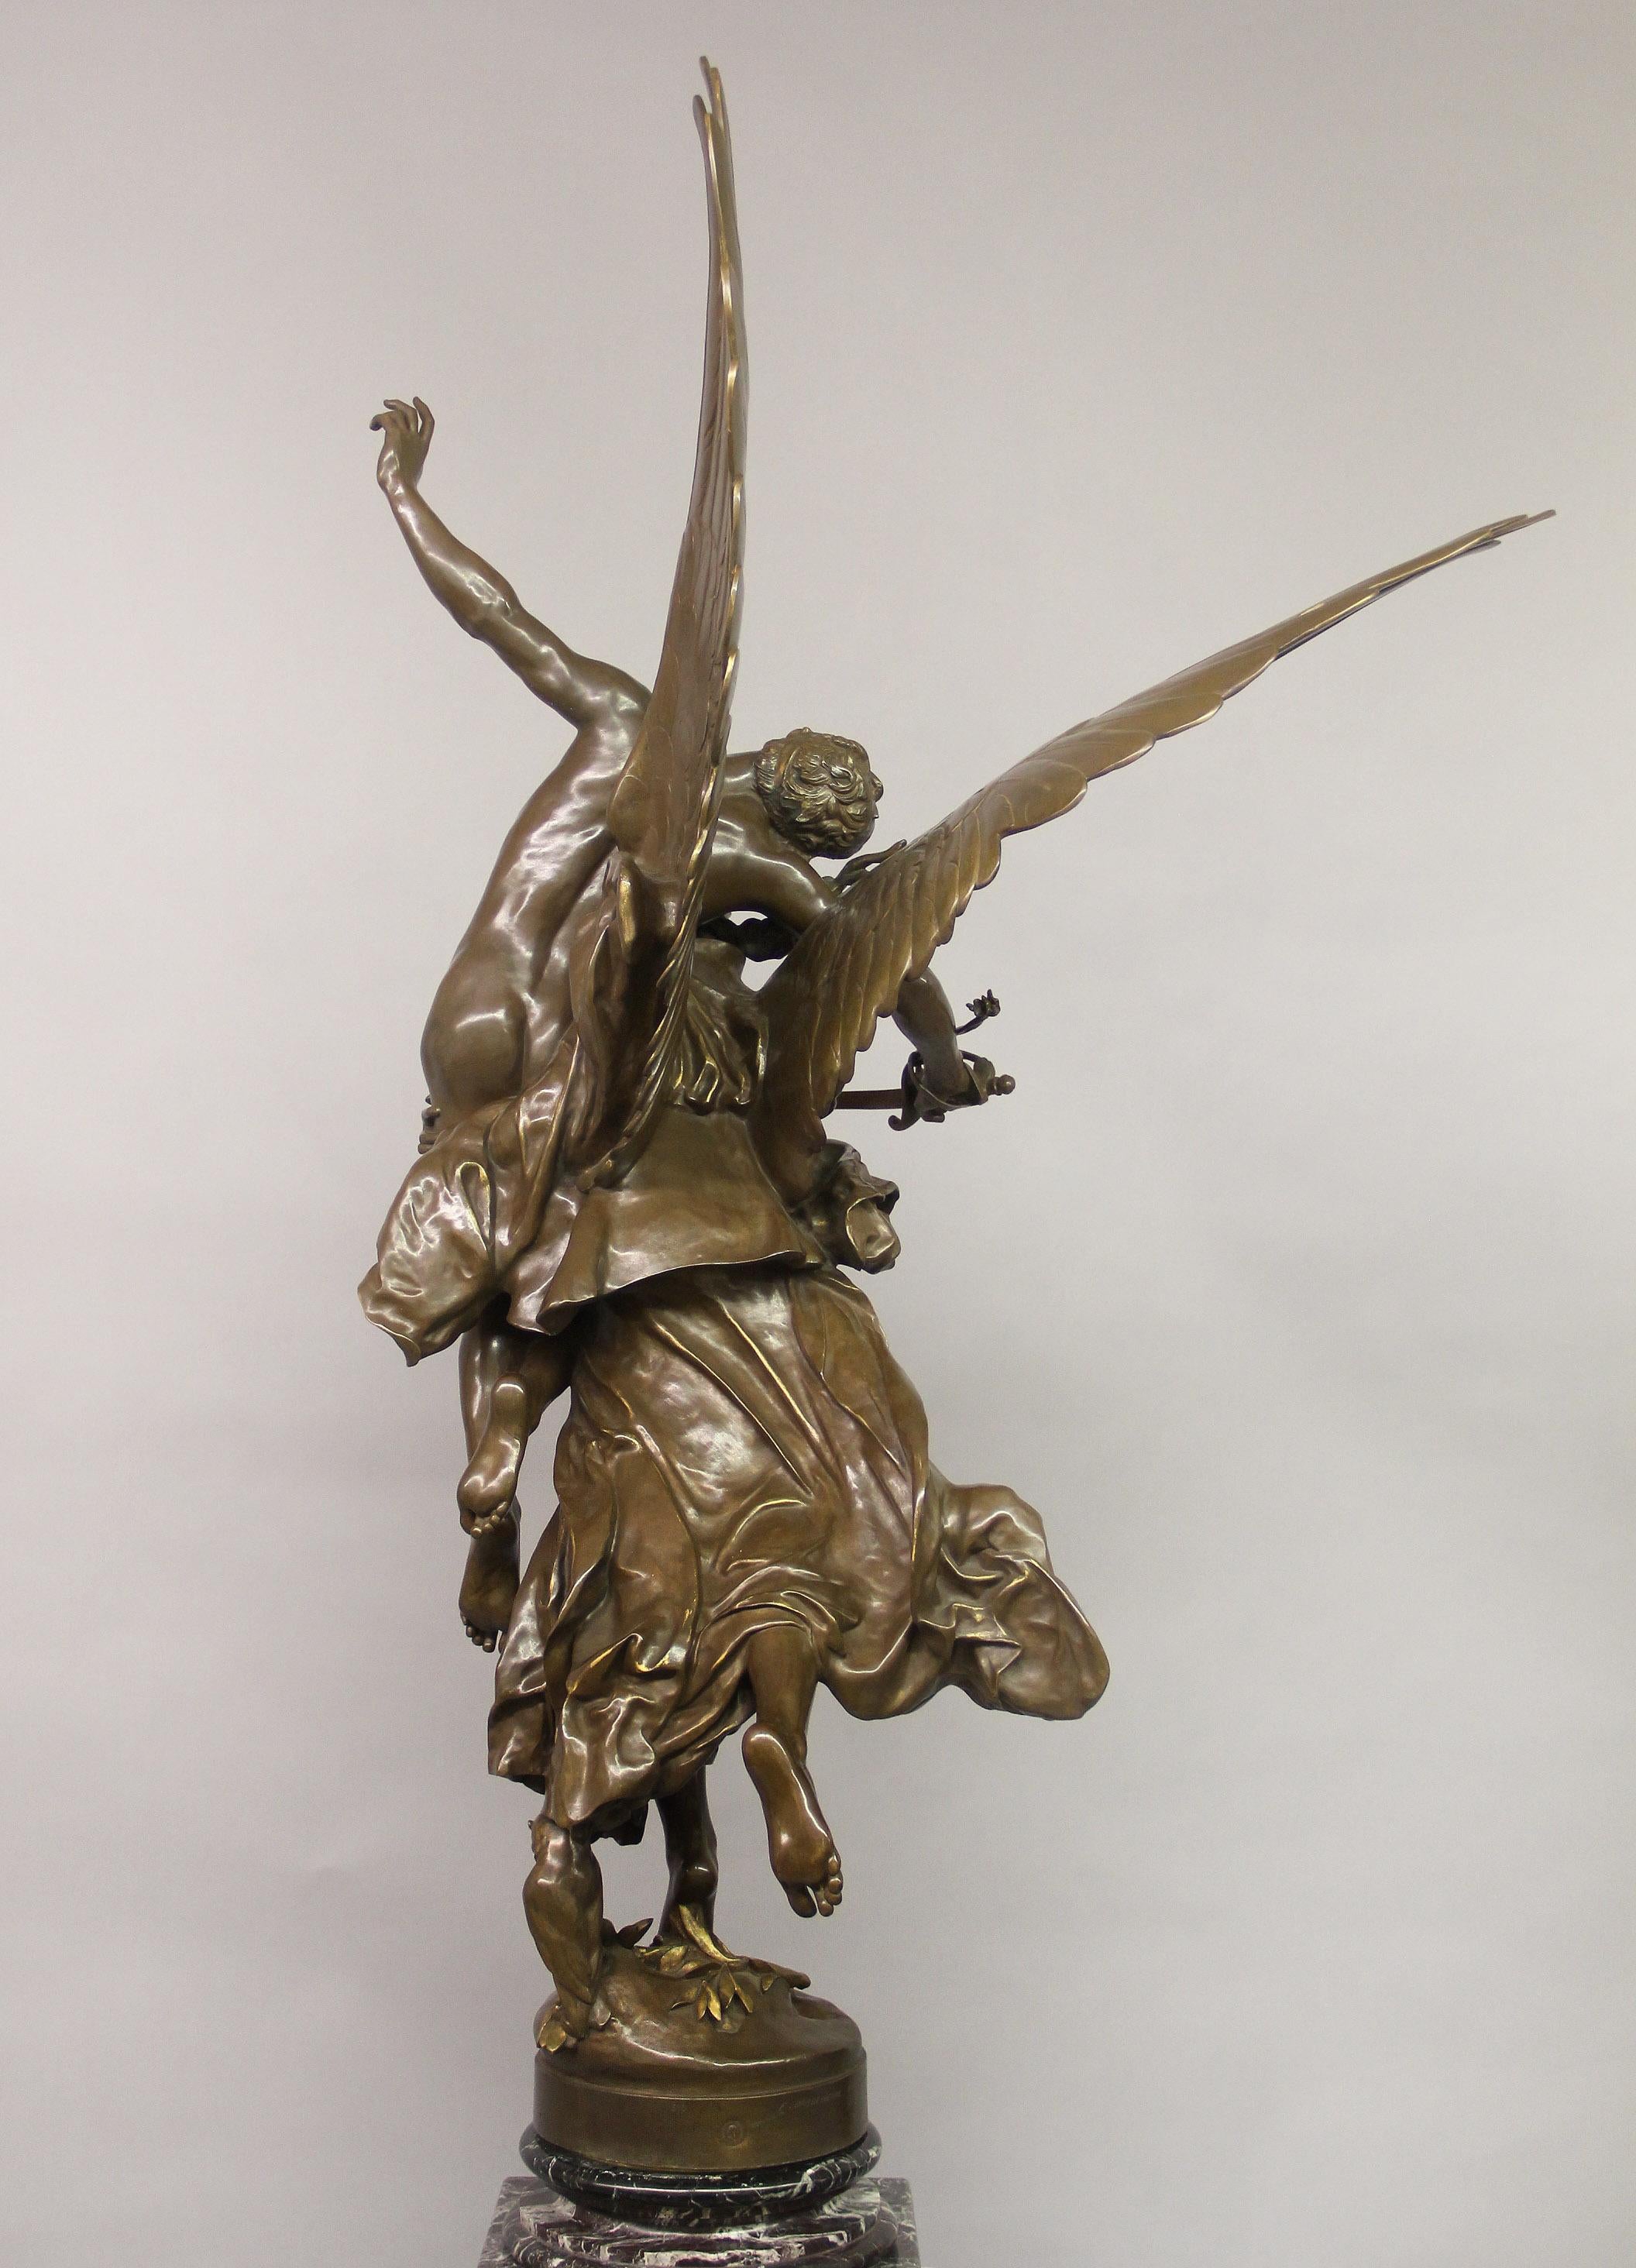 Gilt Exceptional Late 19th Century Bronze “Gloria Victis” by Mercié and Barbedienne